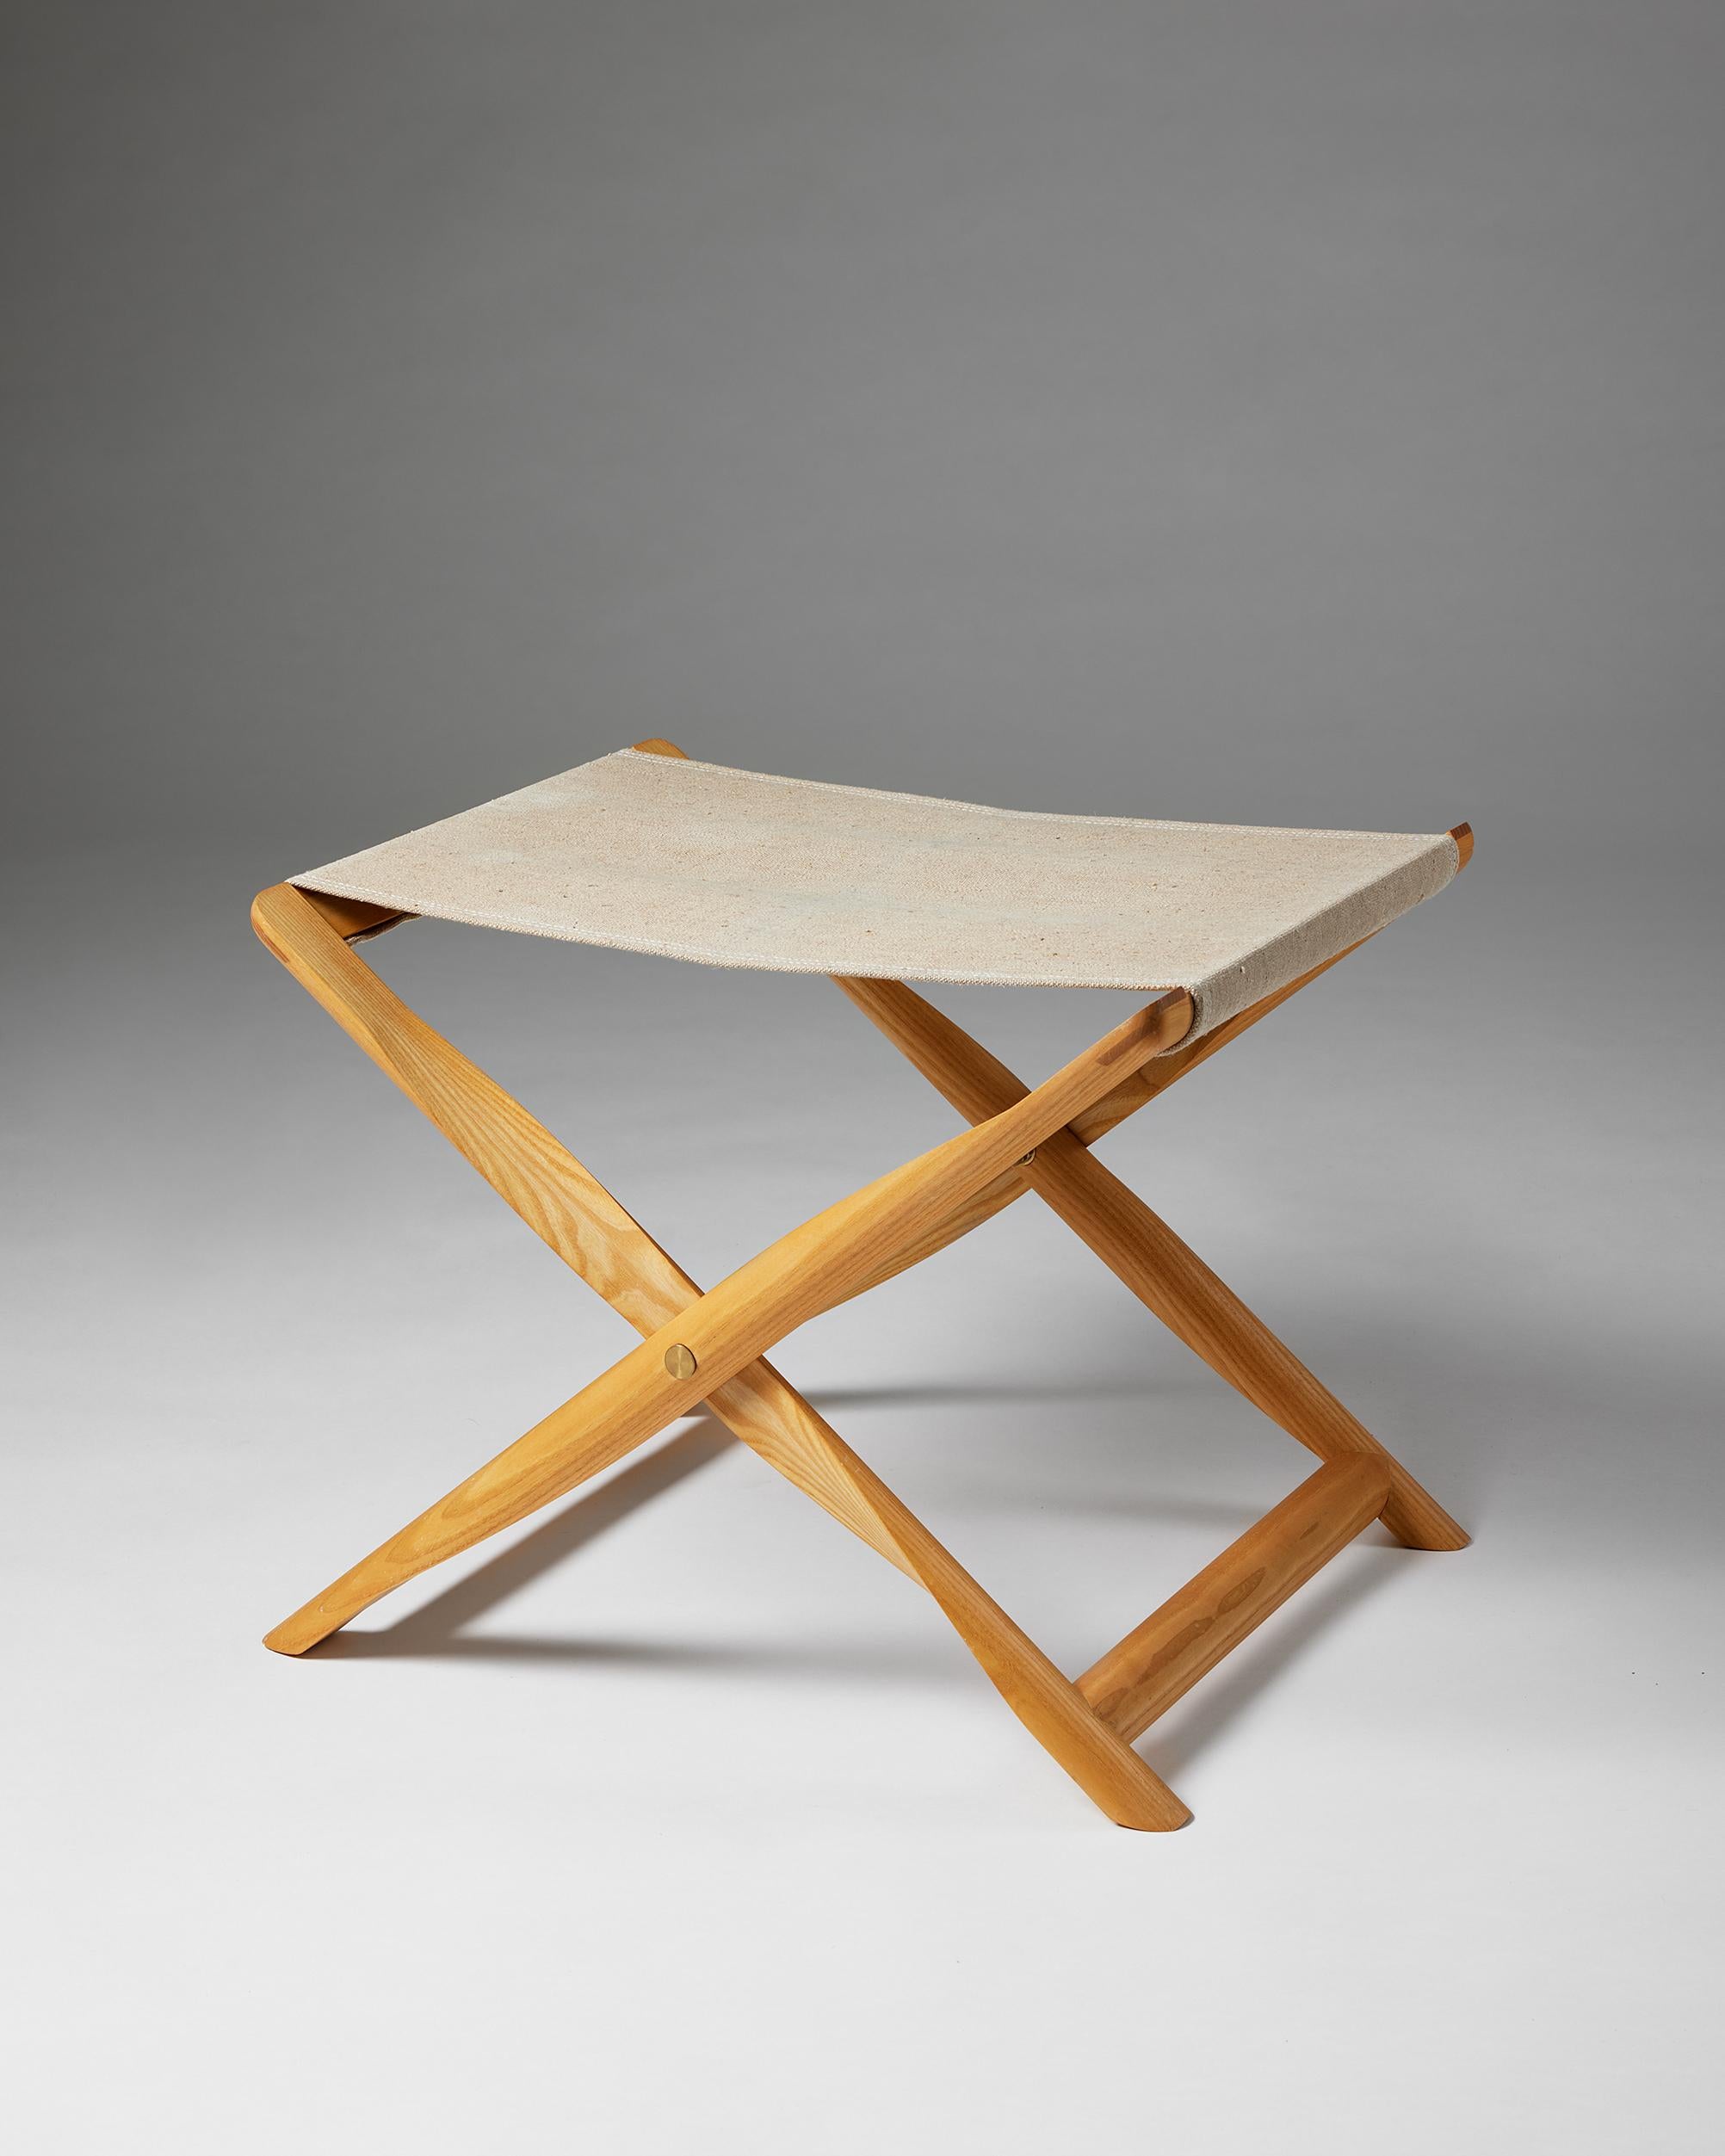 ‘The Propeller Stool’ model 8783 designed by Kaare Klint for Rud. Rasmussens Cabinetmakers,
Denmark, 1930.

Canvas and ash.

Signed.

Kaare Klint was the father of Scandinavian modernism and is responsible for bringing Danish design to the centre